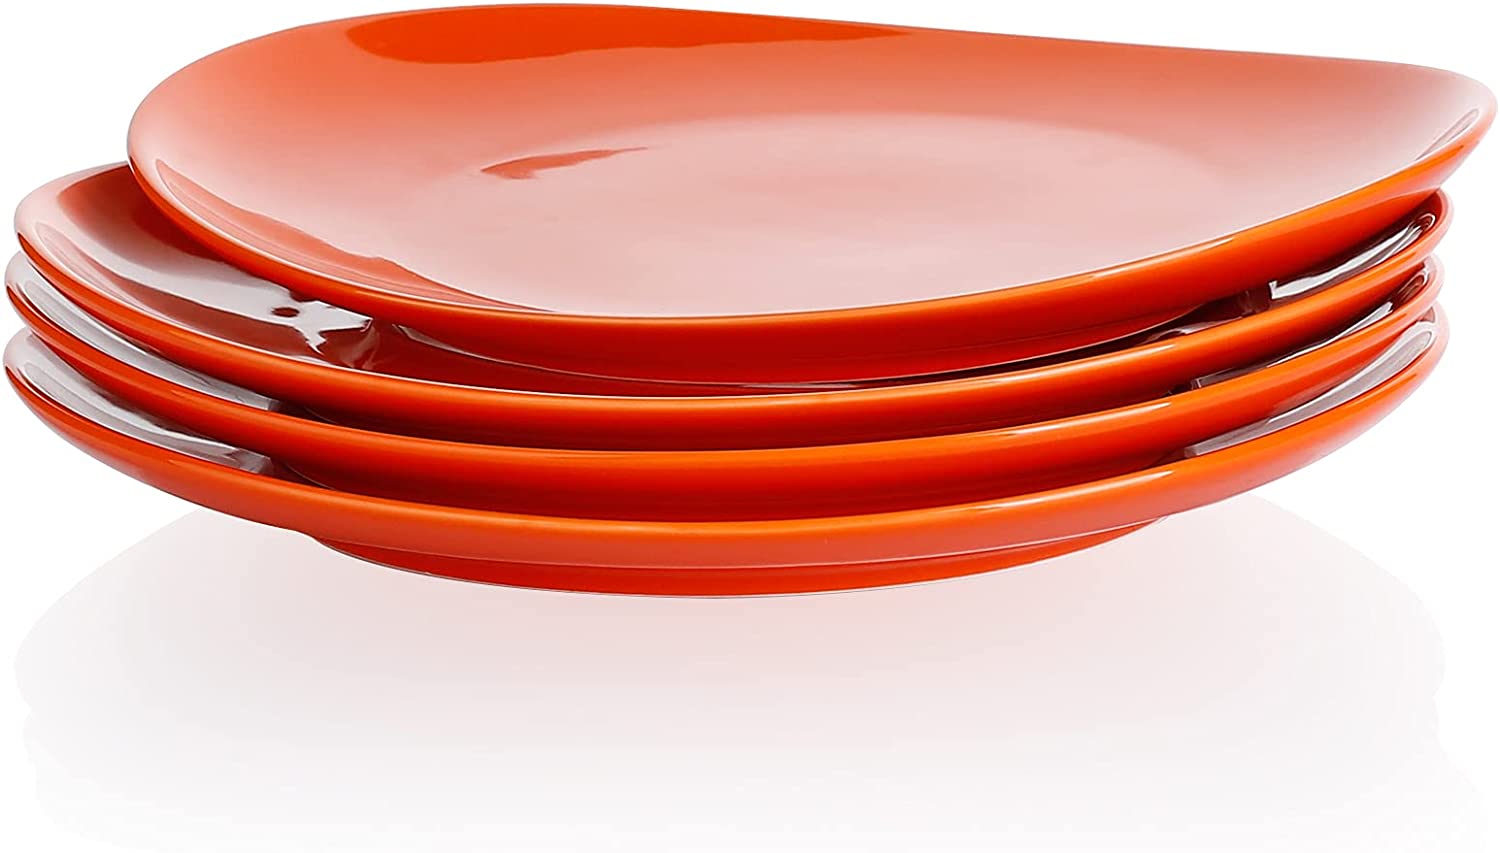 Sweese Stackable Oval Ceramic Plates, 4-Piece